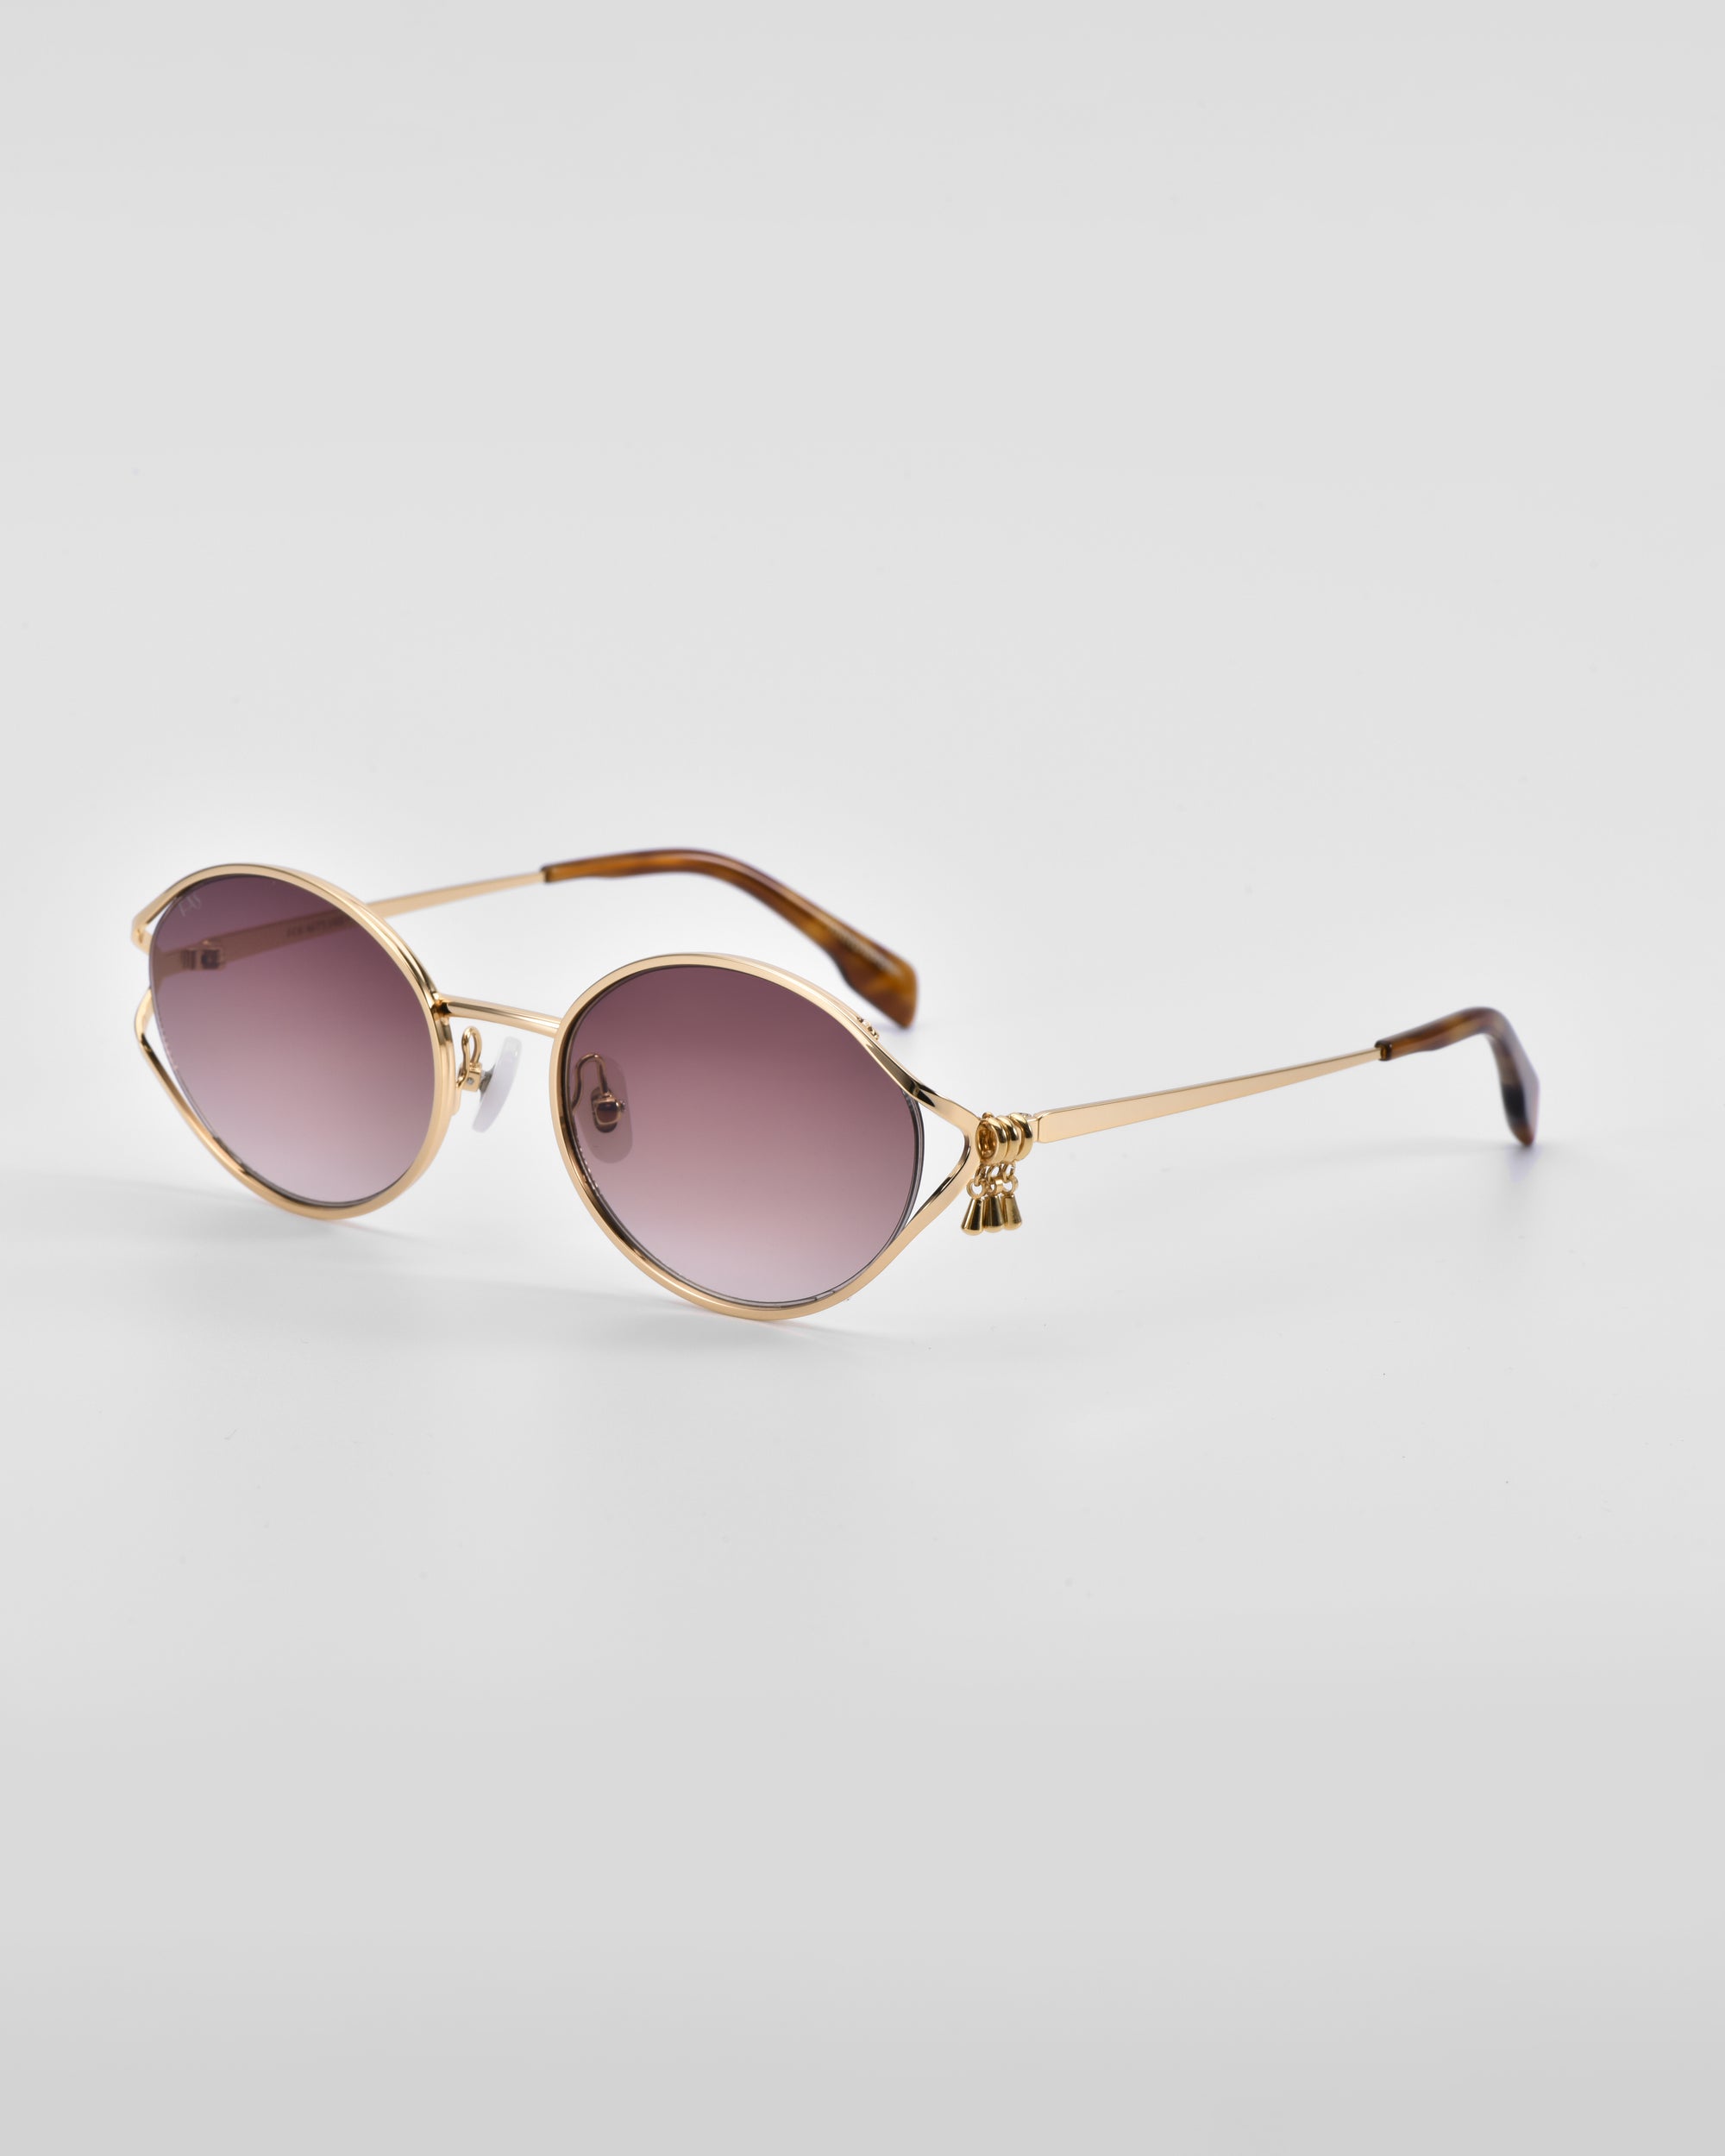 A pair of stylish &#39;Sky&#39; sunglasses by For Art&#39;s Sake® with 18-karat gold frames and oval, pink-tinted lenses. The design includes slender arms with black-tipped ends and small decorative tassels hanging from the temples, as well as natural jade-stone nose pads. Placed against a plain white background.